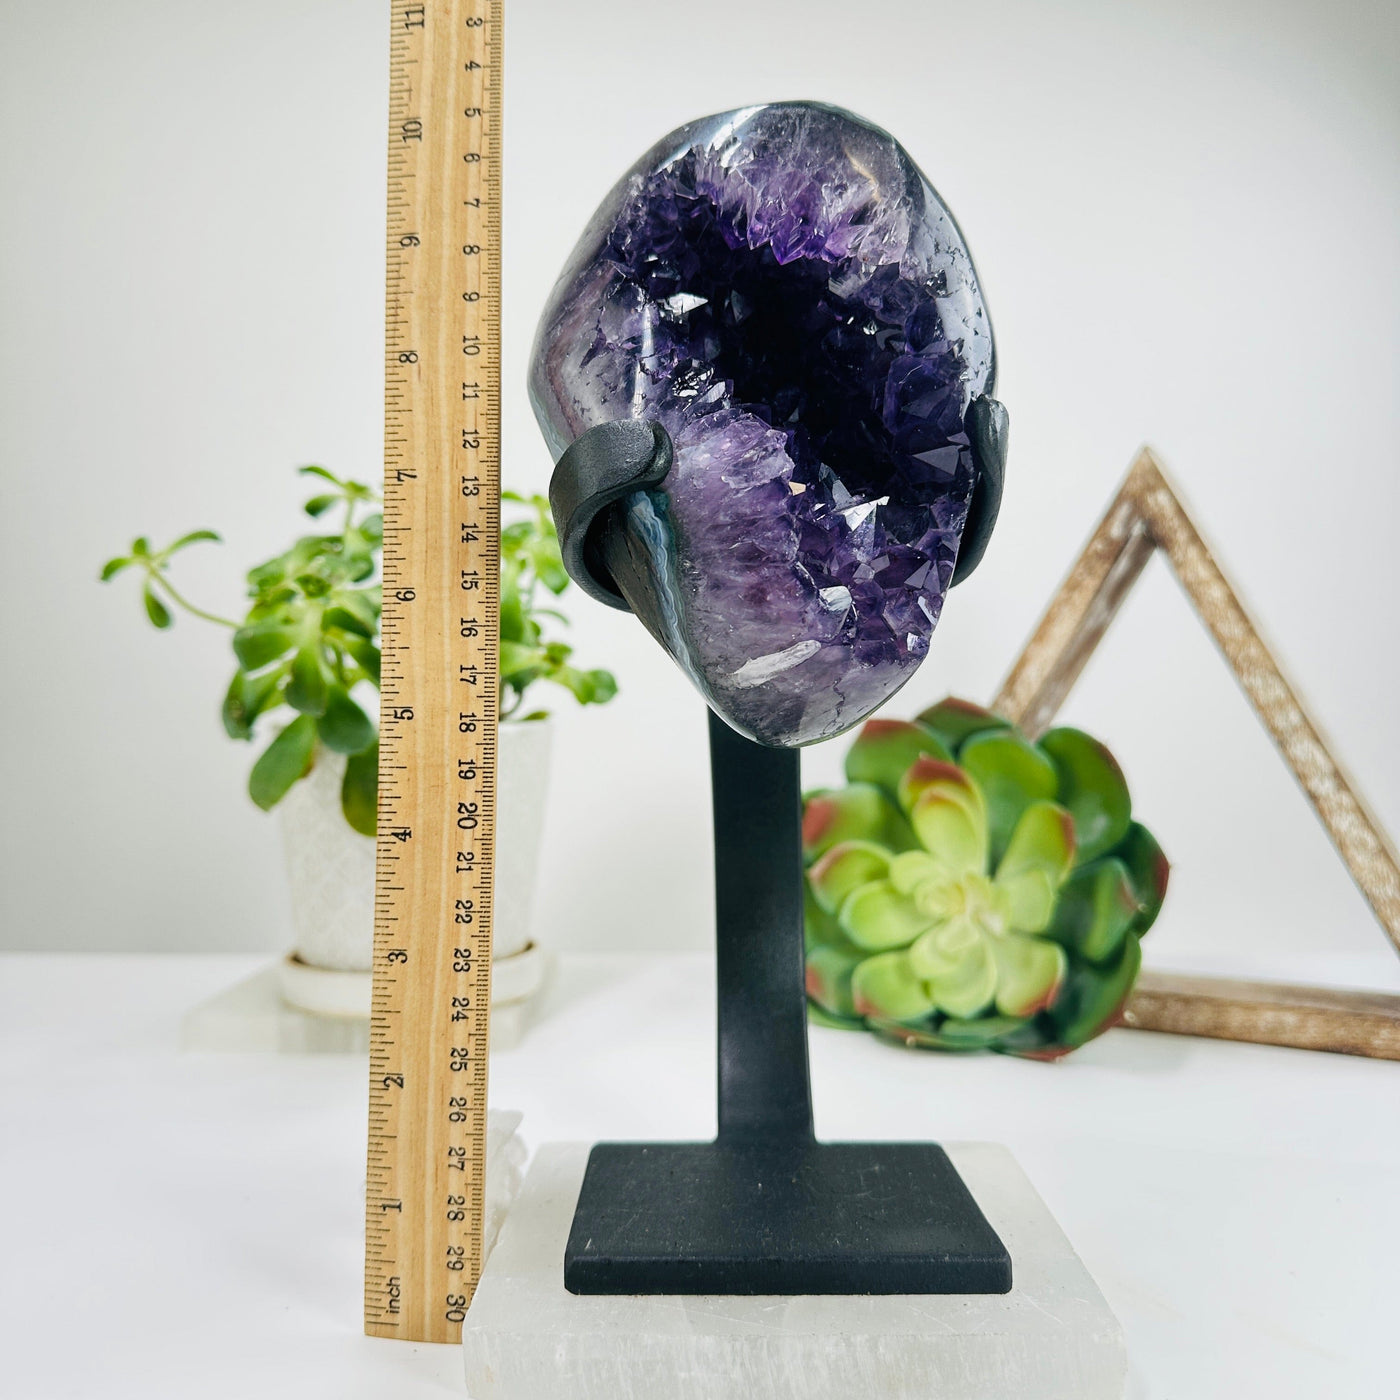 polished amethyst on stand next to a ruler for size reference